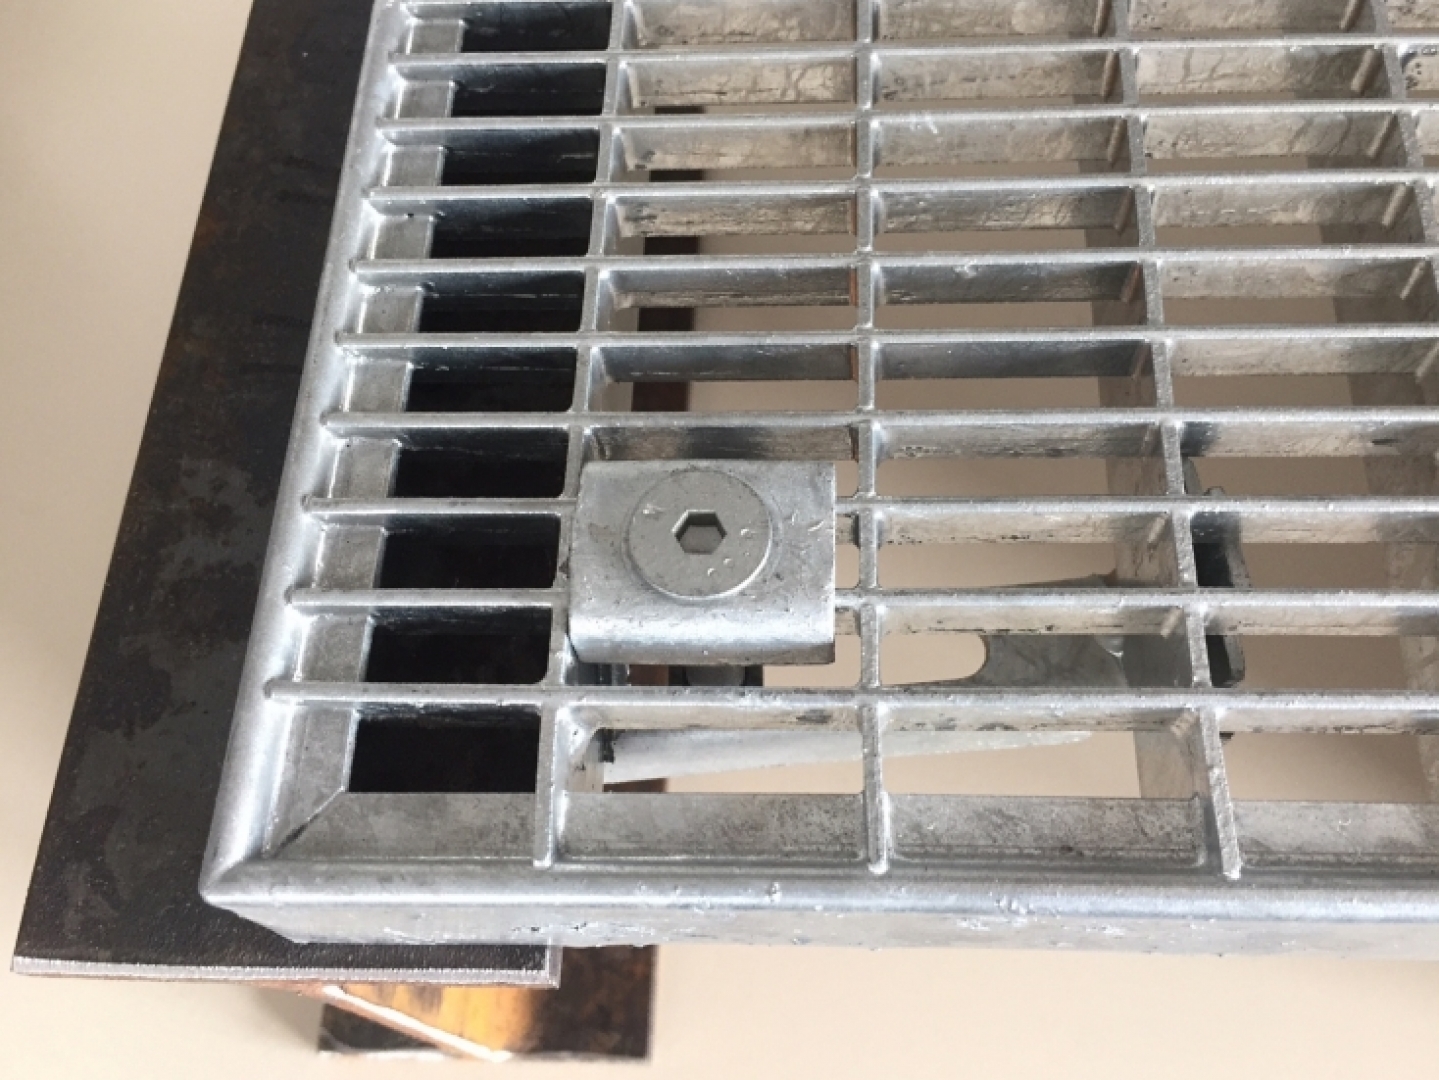 Grating clamp galvanized for mesh size 30x10mm up to grating height 40mm - Kopie - Kopie